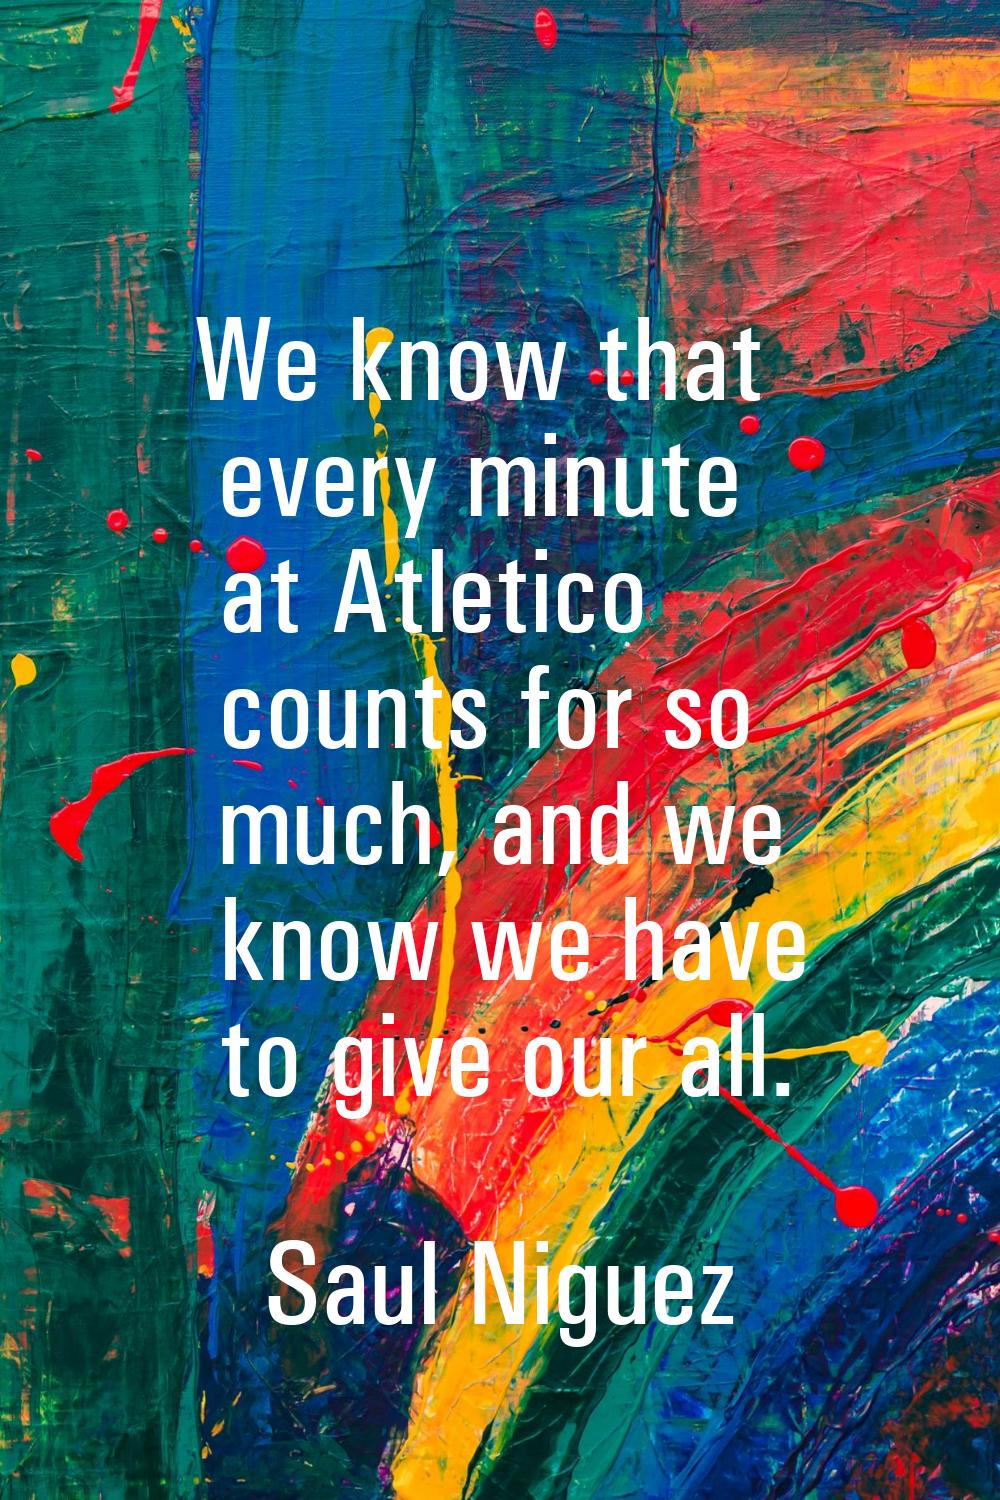 We know that every minute at Atletico counts for so much, and we know we have to give our all.